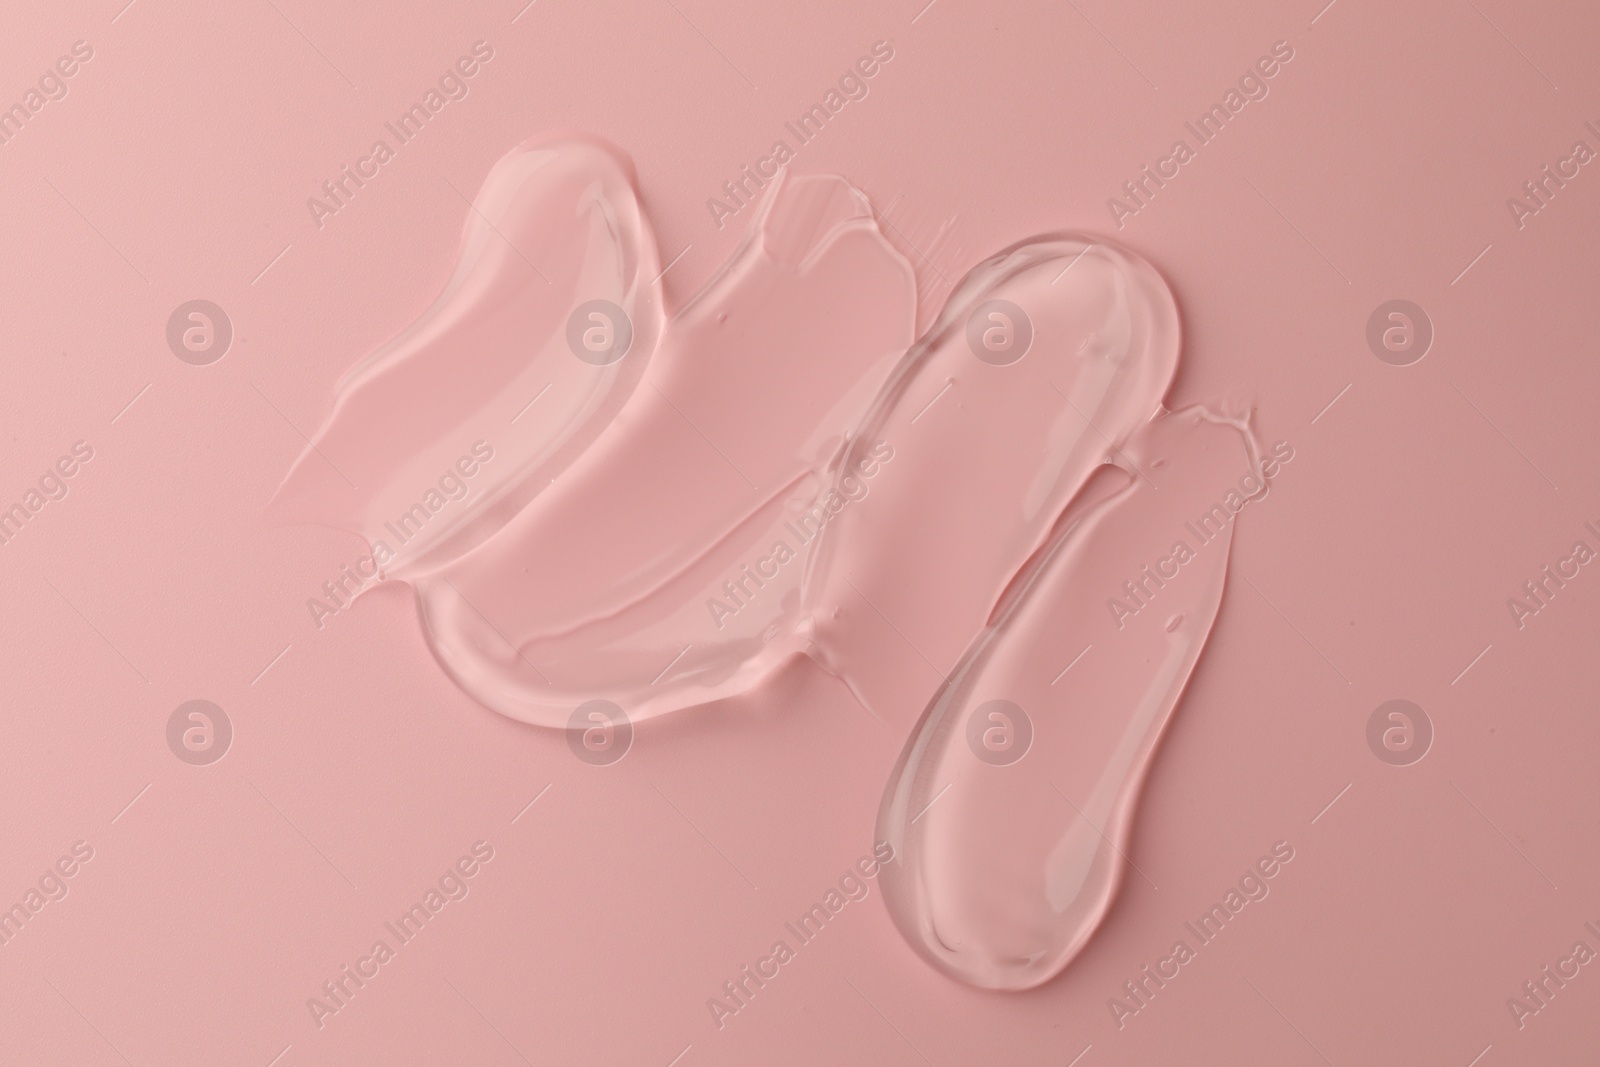 Photo of Sample of clear cosmetic gel on pink background, top view